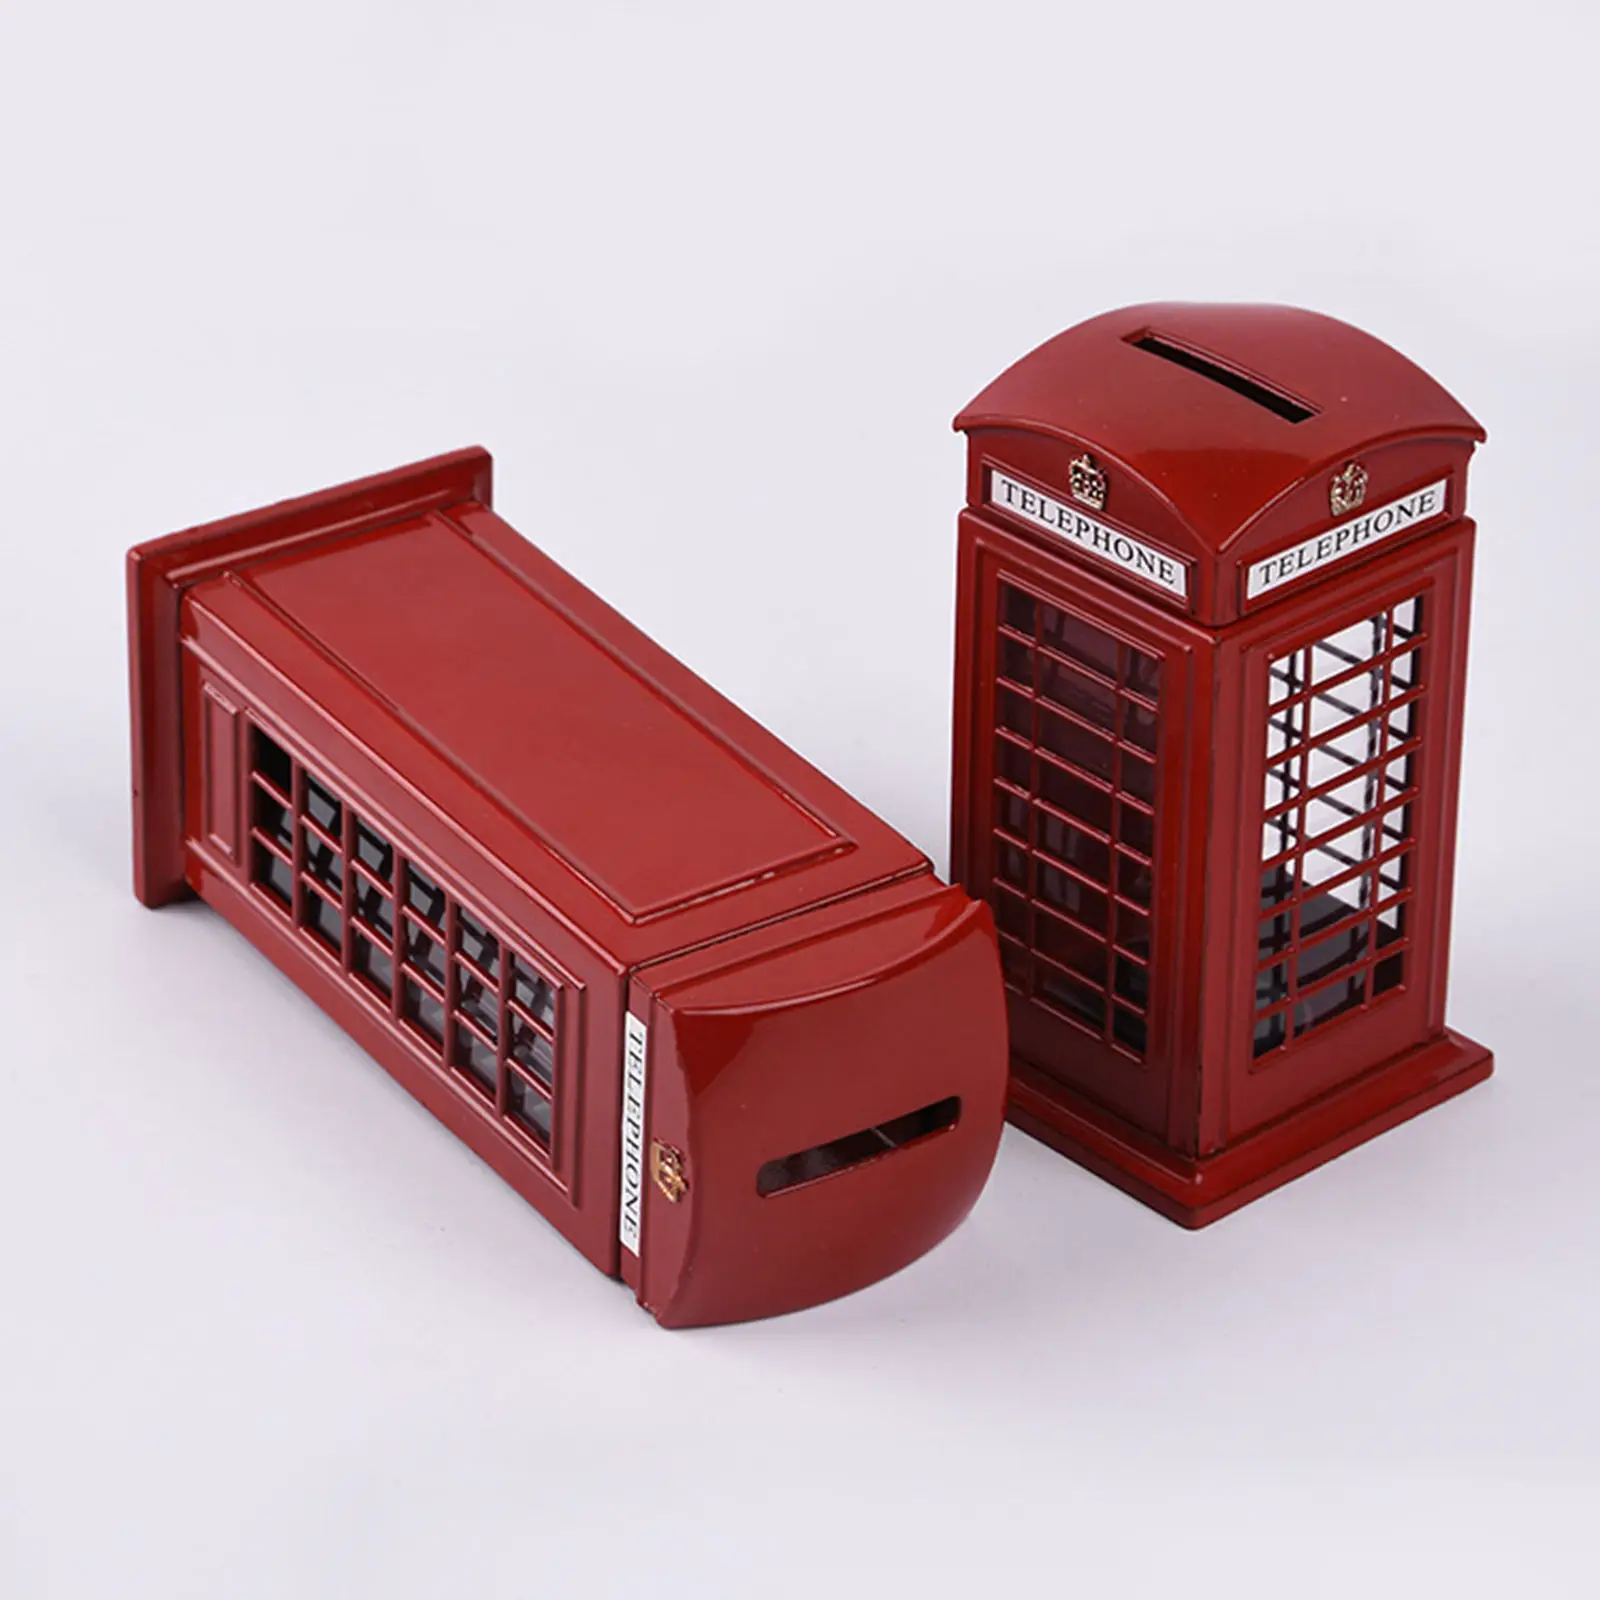 Telephone Booth Piggy Bank Creative London Style Telephone Booth Post Money Saving Box Home Decor Souvenir Gift for Kids Adults